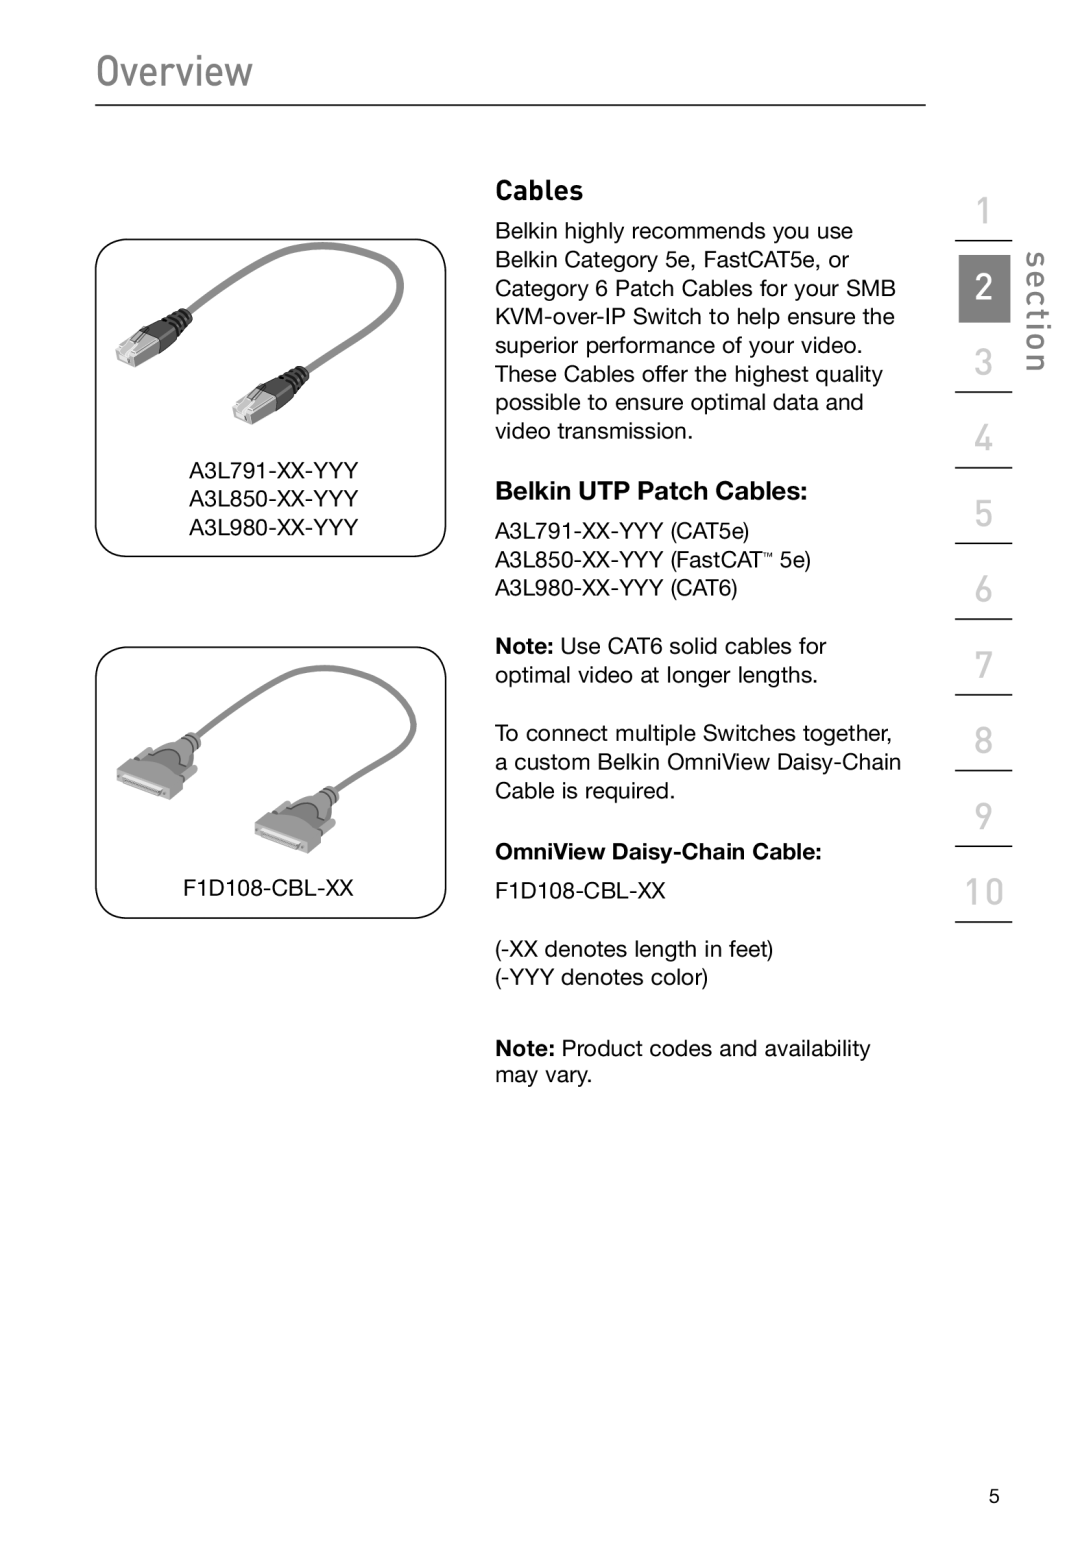 Belkin F1DP108G user manual section, Cables, Overview, OmniView Daisy-Chain Cable 